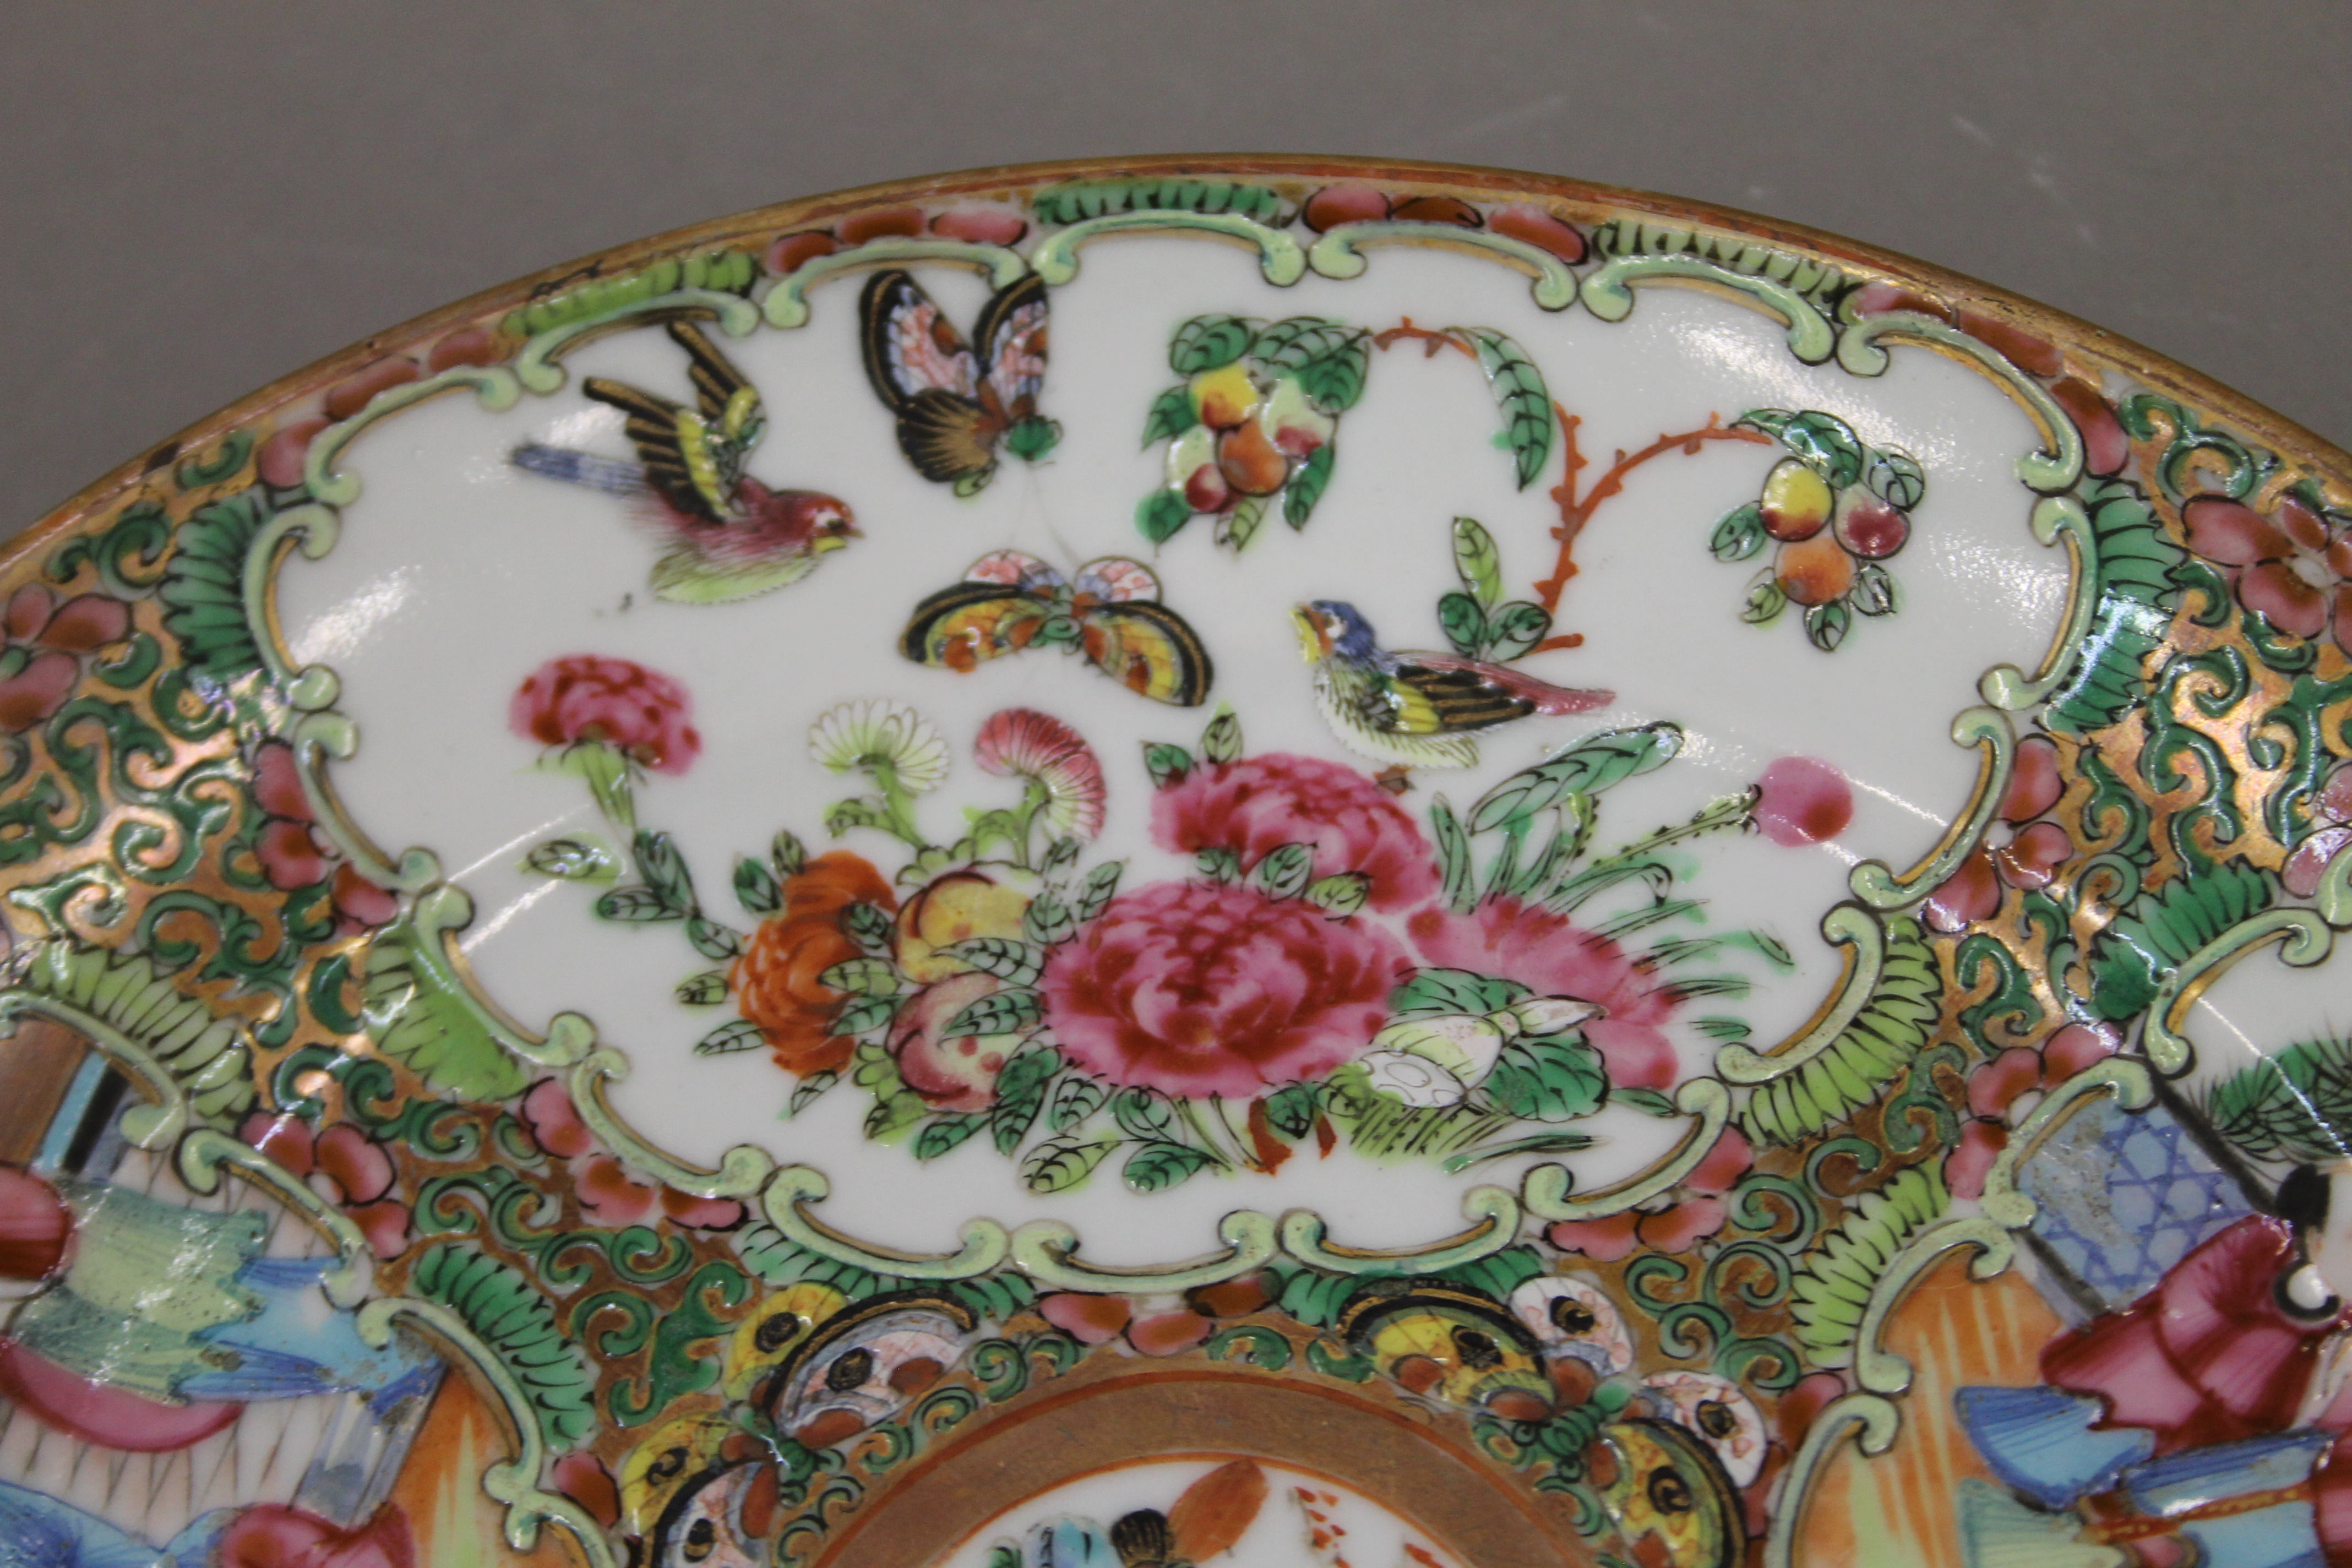 A 19th century Canton famille rose porcelain plate hand painted with attendants, birds, butterflies, - Image 4 of 6